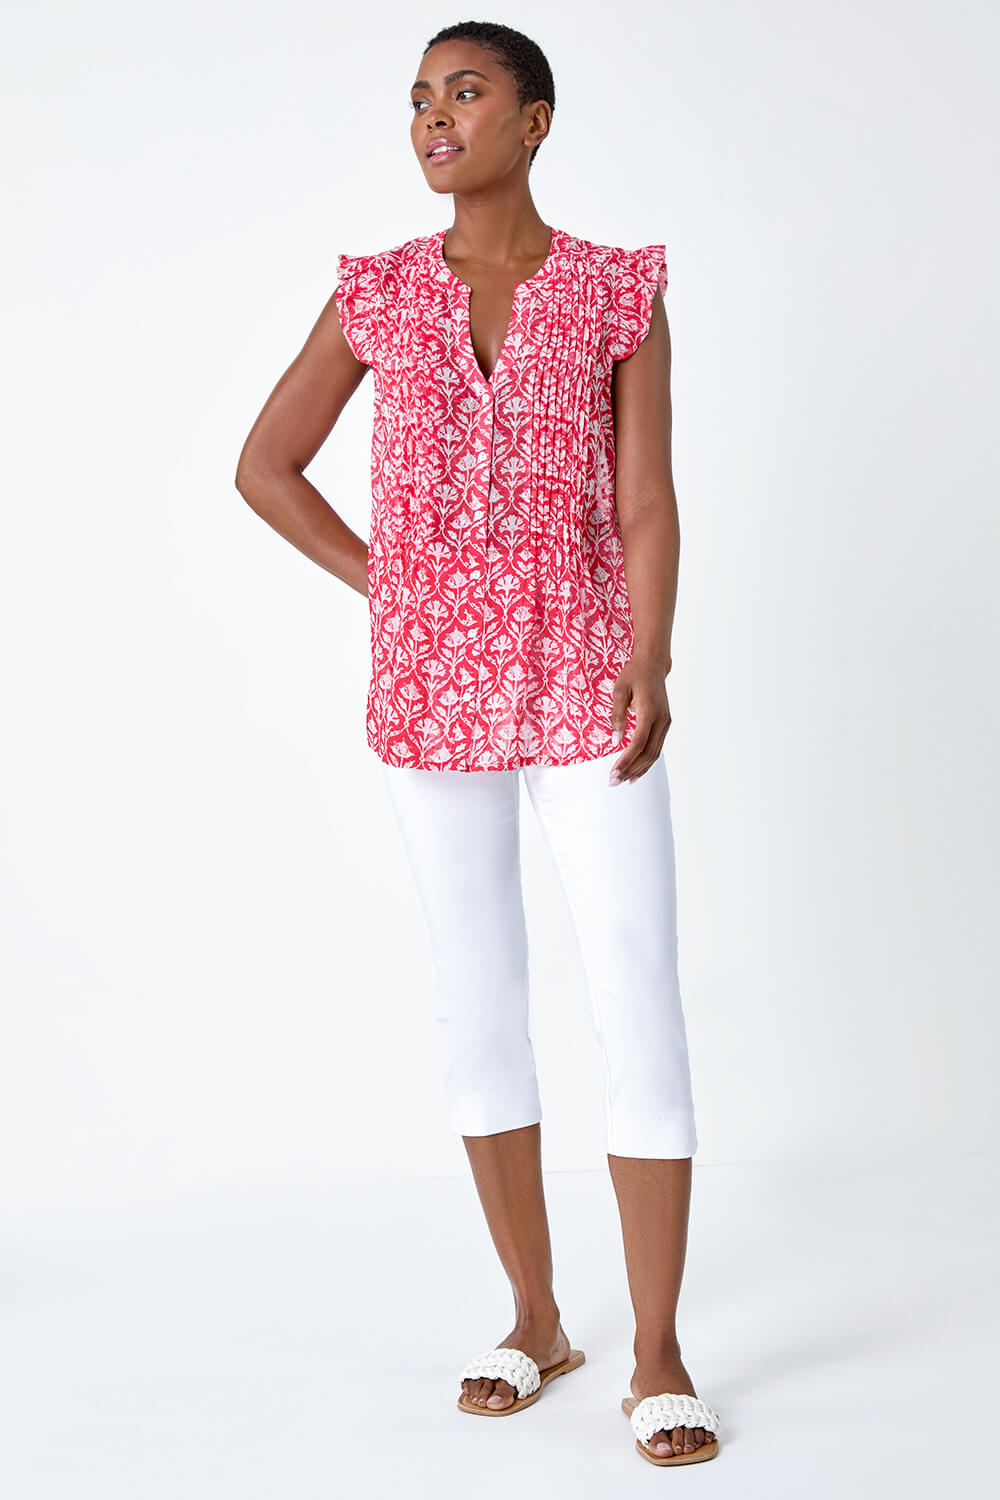 PINK Frill Sleeve Floral Print Blouse, Image 2 of 5